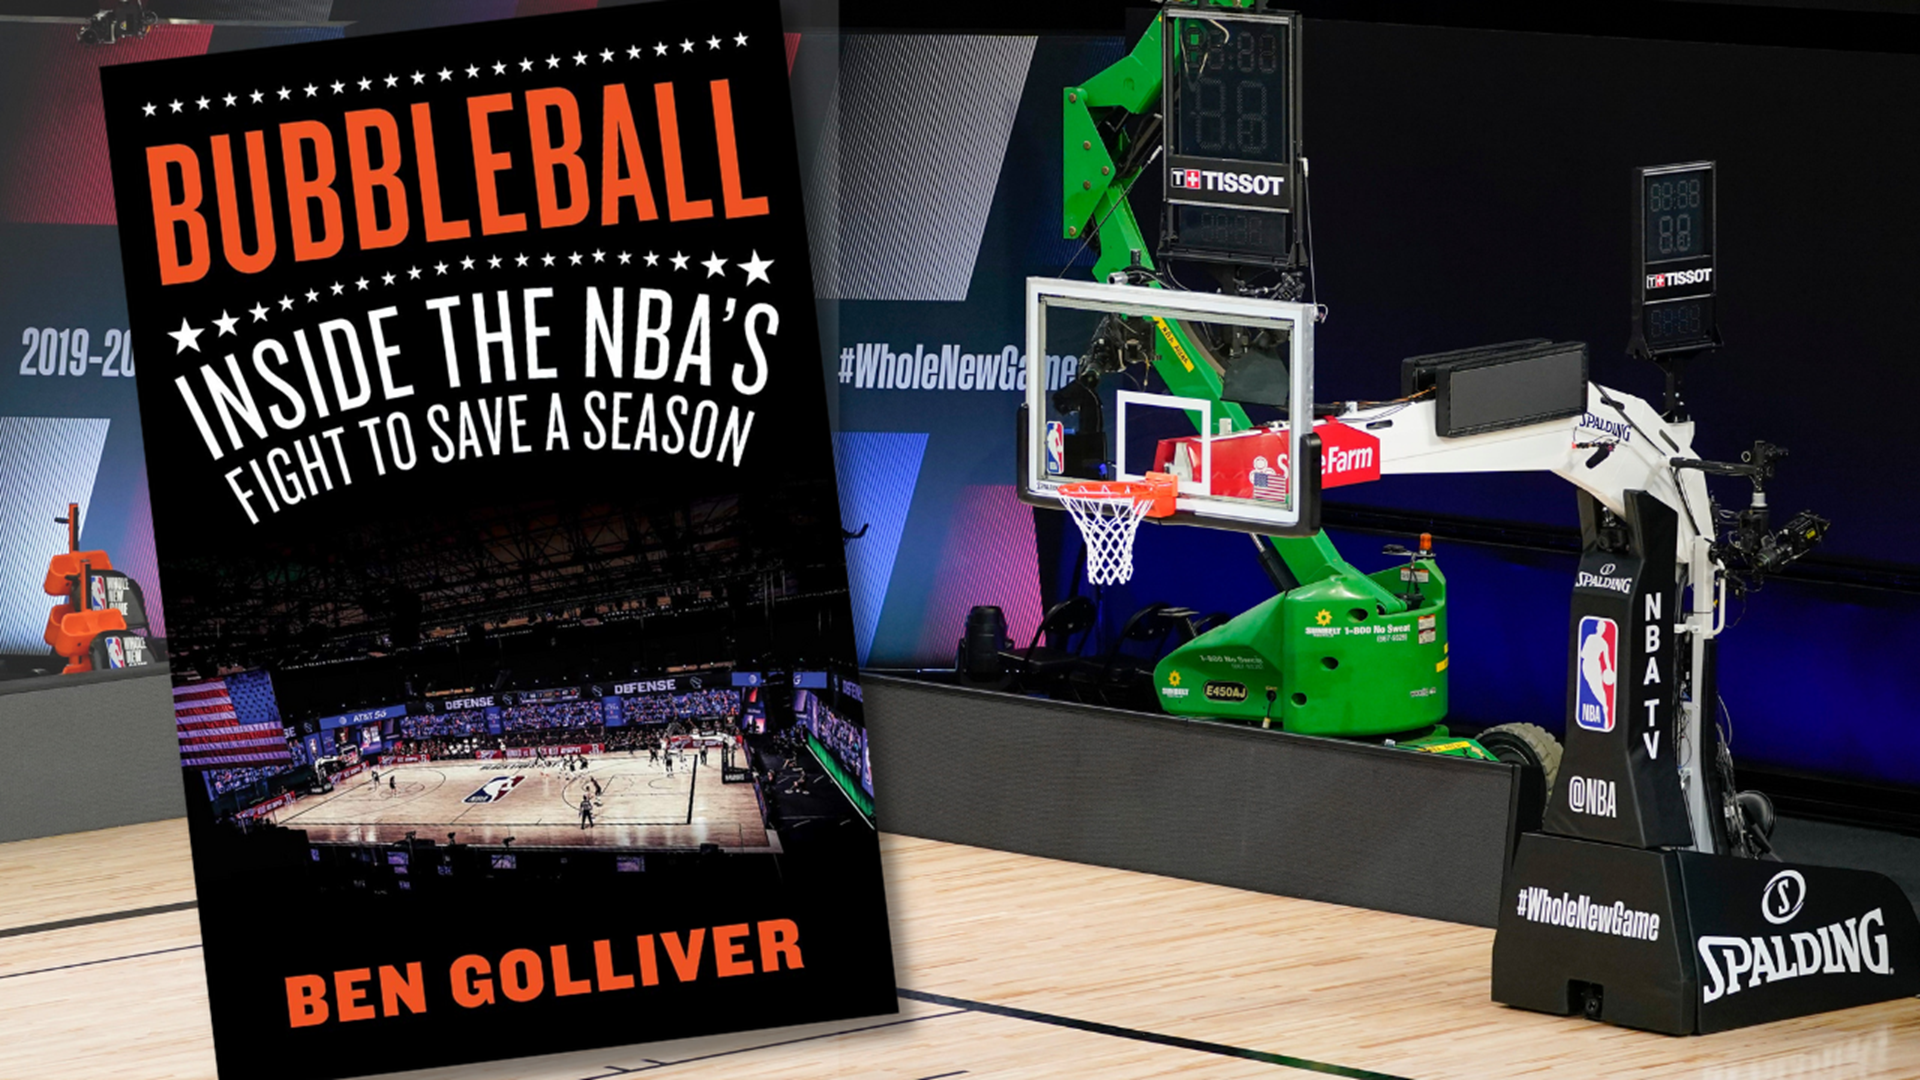 "Bubbleball: Inside the NBA's Fight to Save a Season" comes out May 4. The author, Ben Golliver, grew up in Beaverton and covers the NBA for The Washington Post.